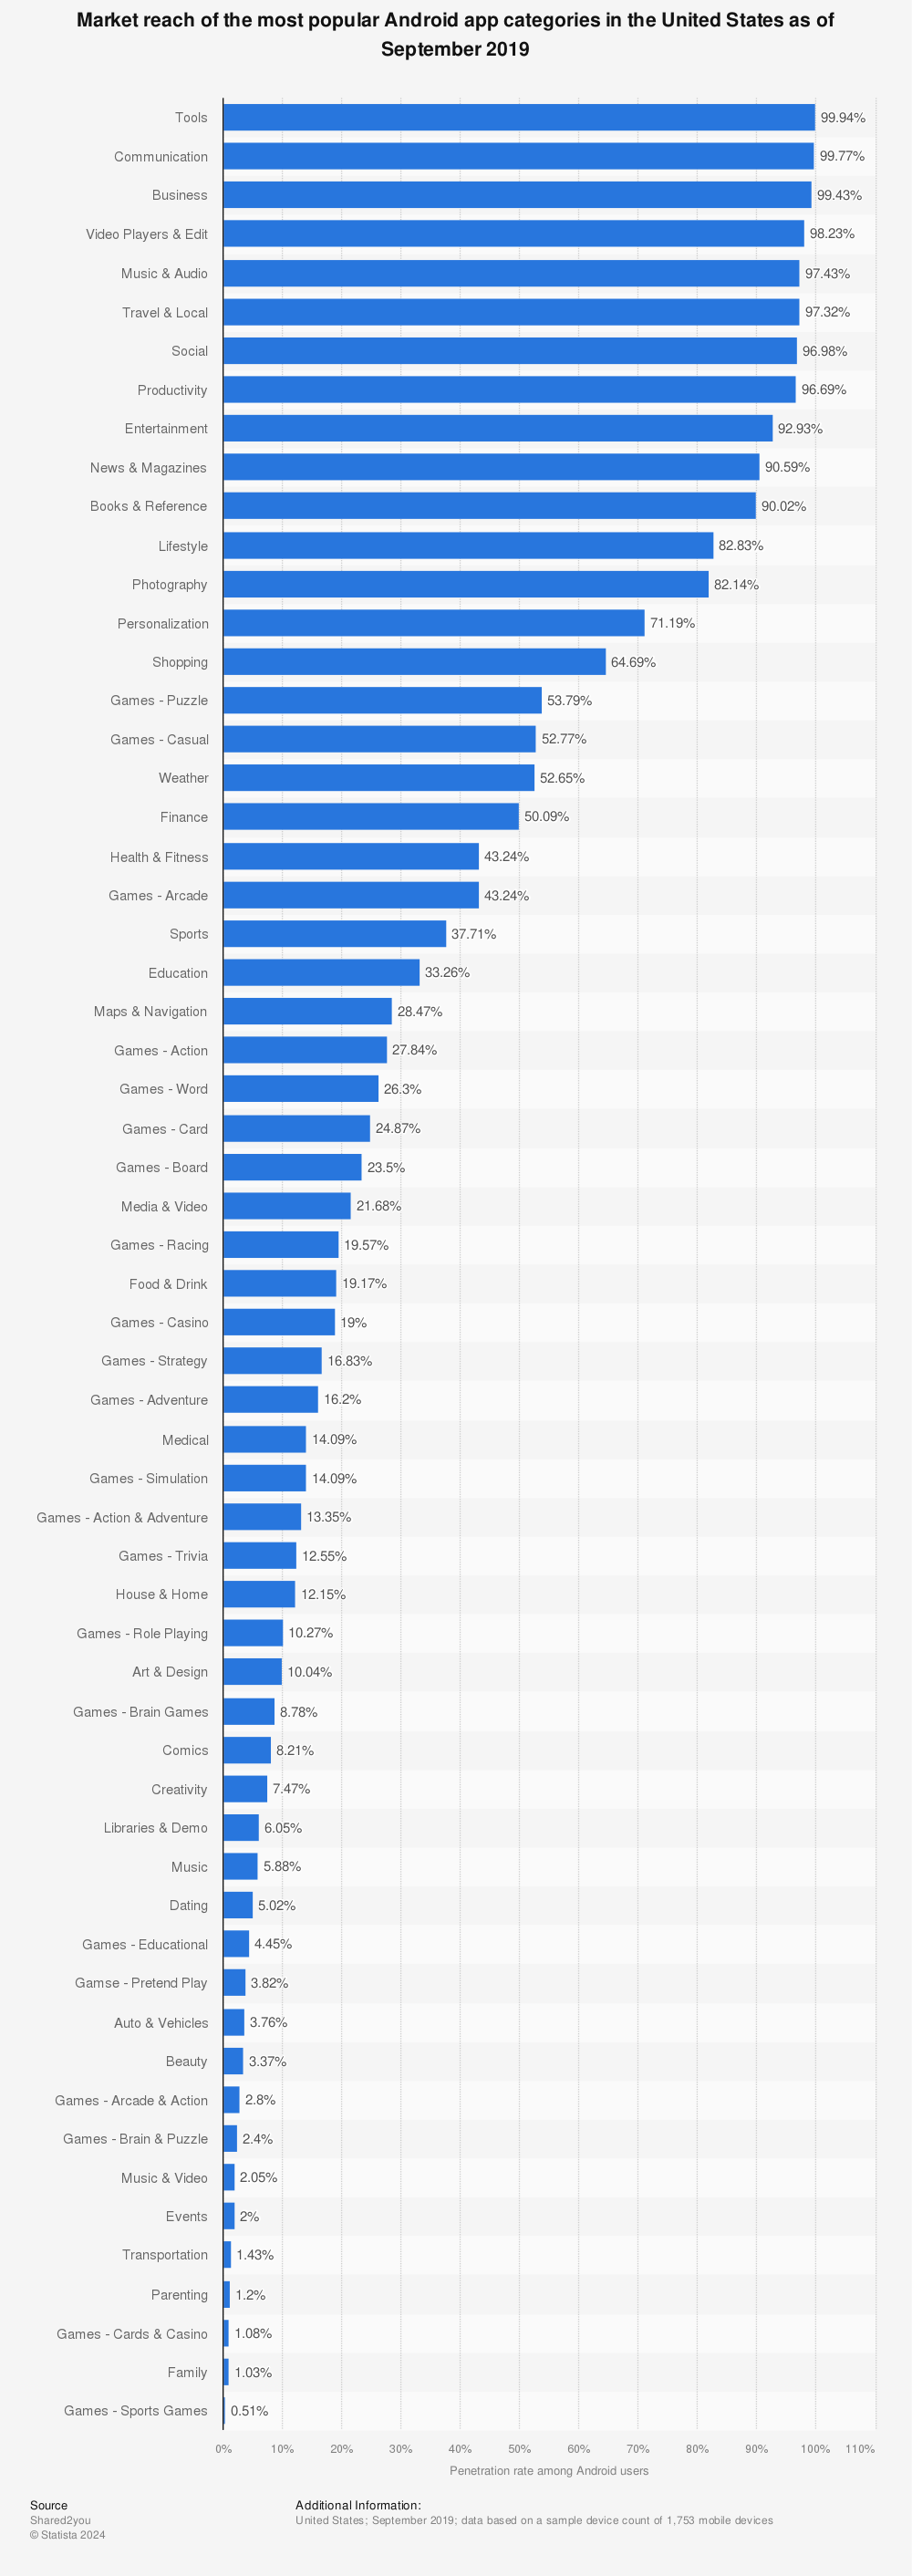 Statistic: Market reach of the most popular Android app categories in the United States as of September 2019 | Statista